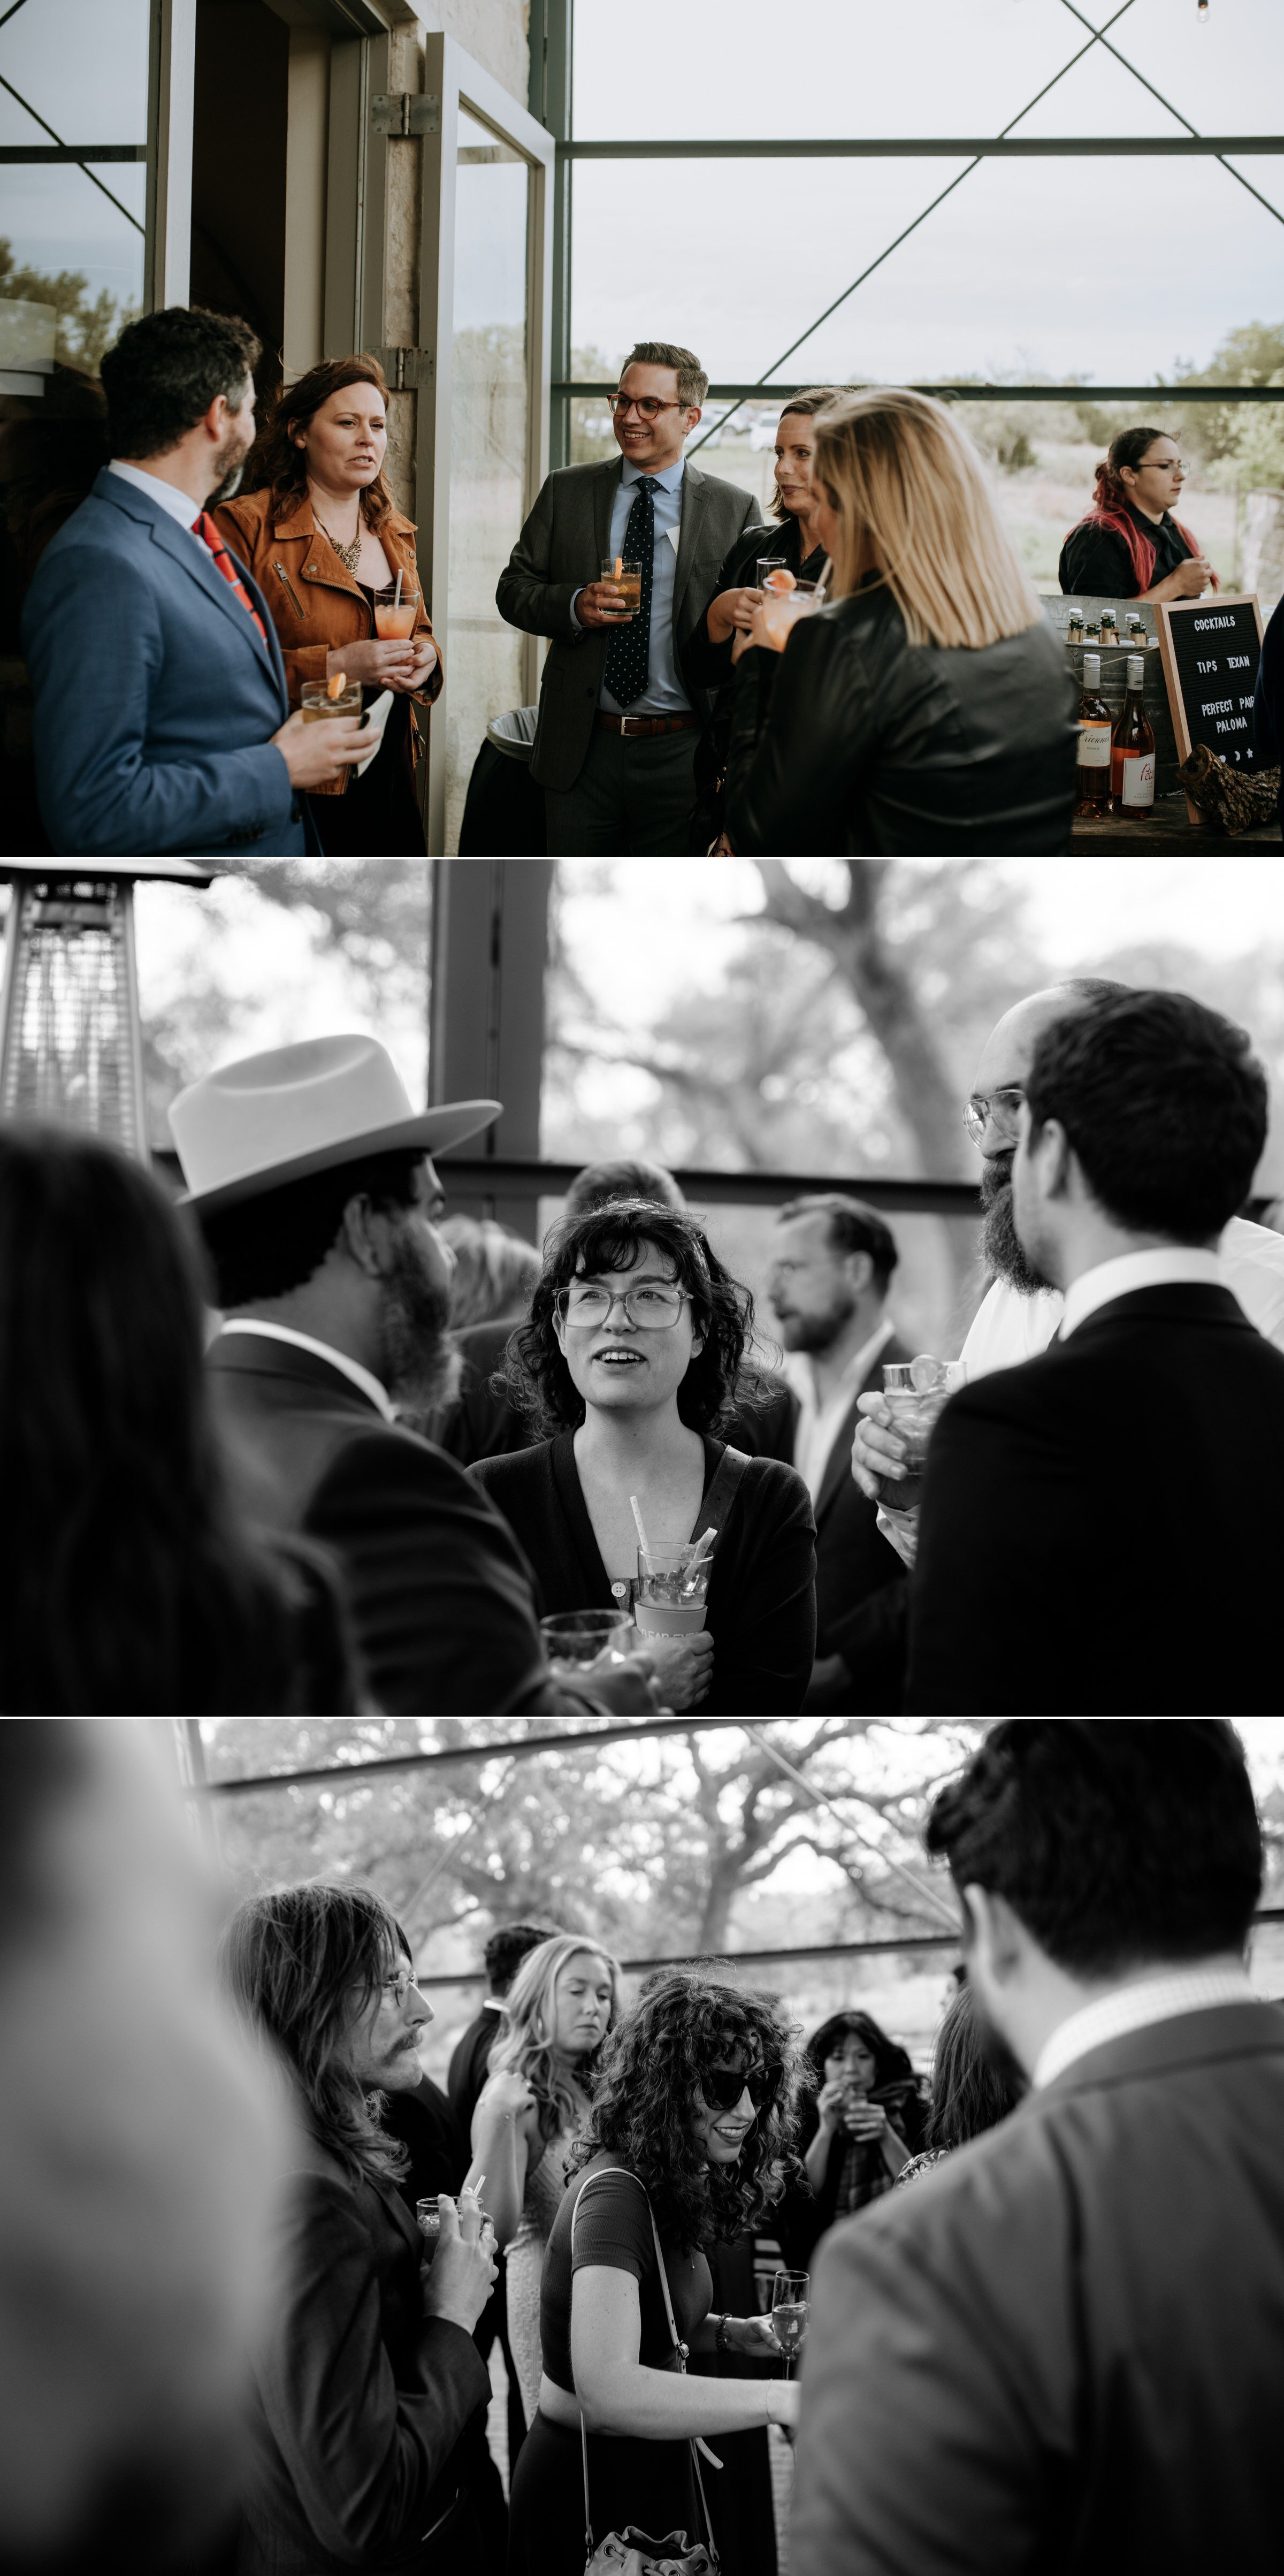  guests during reception at wedding in austin texas 